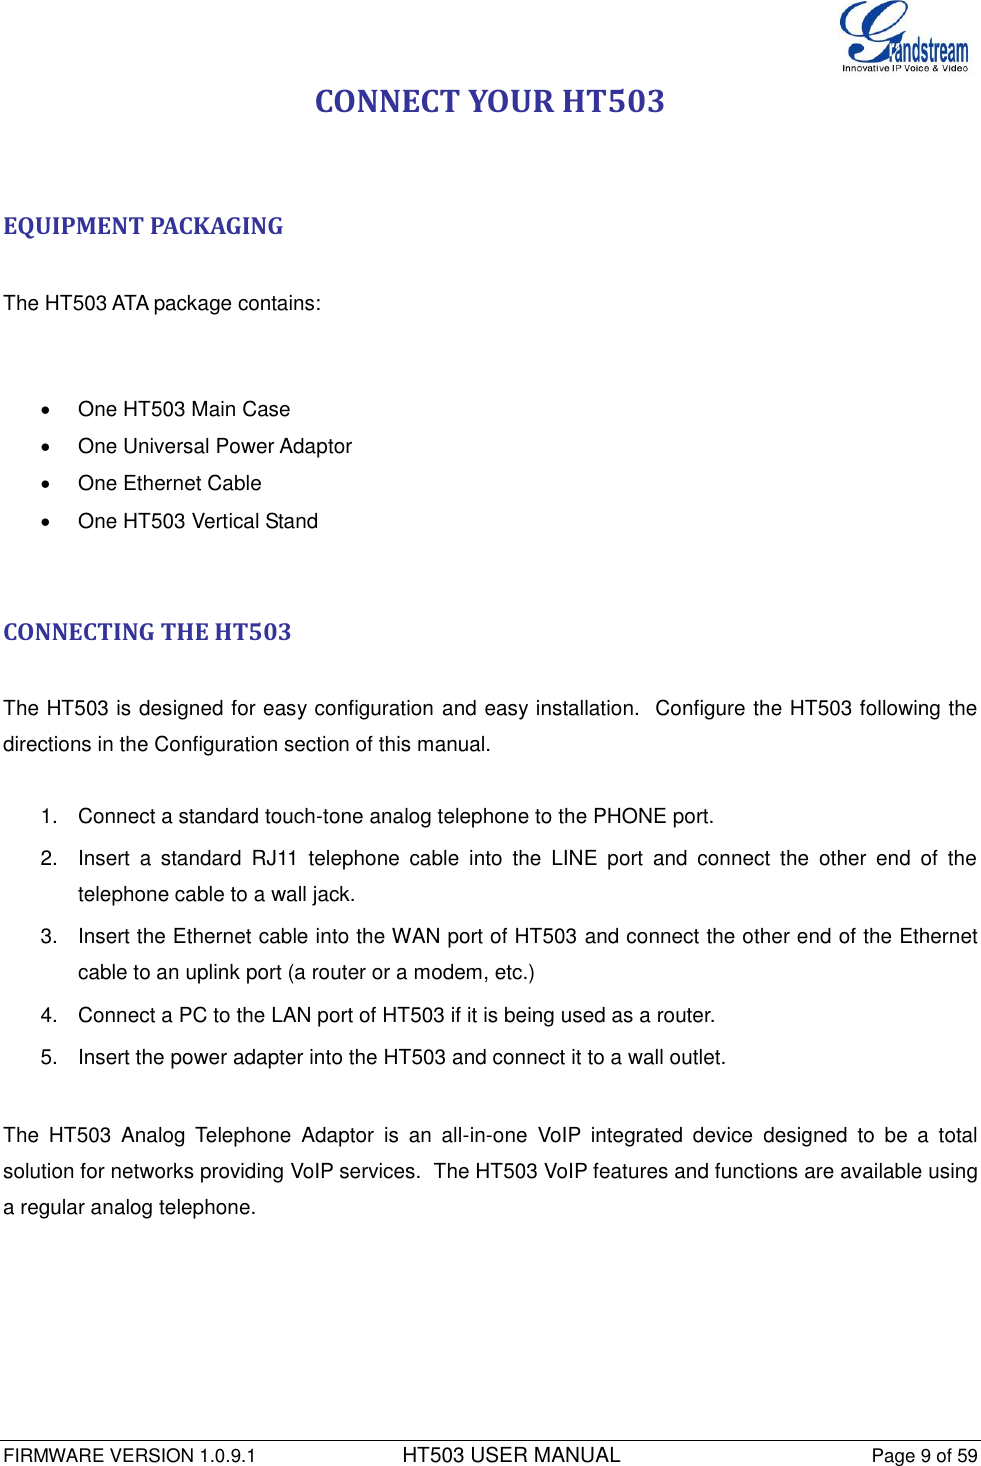  FIRMWARE VERSION 1.0.9.1          HT503 USER MANUAL Page 9 of 59       CONNECT YOUR HT503   EQUIPMENT PACKAGING  The HT503 ATA package contains:    One HT503 Main Case   One Universal Power Adaptor   One Ethernet Cable   One HT503 Vertical Stand   CONNECTING THE HT503  The HT503 is designed for easy configuration and easy installation.  Configure the HT503 following the directions in the Configuration section of this manual.   1.  Connect a standard touch-tone analog telephone to the PHONE port. 2.  Insert  a  standard  RJ11  telephone  cable  into  the  LINE  port  and  connect  the  other  end  of  the telephone cable to a wall jack. 3.  Insert the Ethernet cable into the WAN port of HT503 and connect the other end of the Ethernet cable to an uplink port (a router or a modem, etc.) 4.  Connect a PC to the LAN port of HT503 if it is being used as a router. 5.  Insert the power adapter into the HT503 and connect it to a wall outlet.   The  HT503  Analog  Telephone  Adaptor  is  an  all-in-one  VoIP  integrated  device  designed  to  be  a  total solution for networks providing VoIP services.  The HT503 VoIP features and functions are available using a regular analog telephone.   